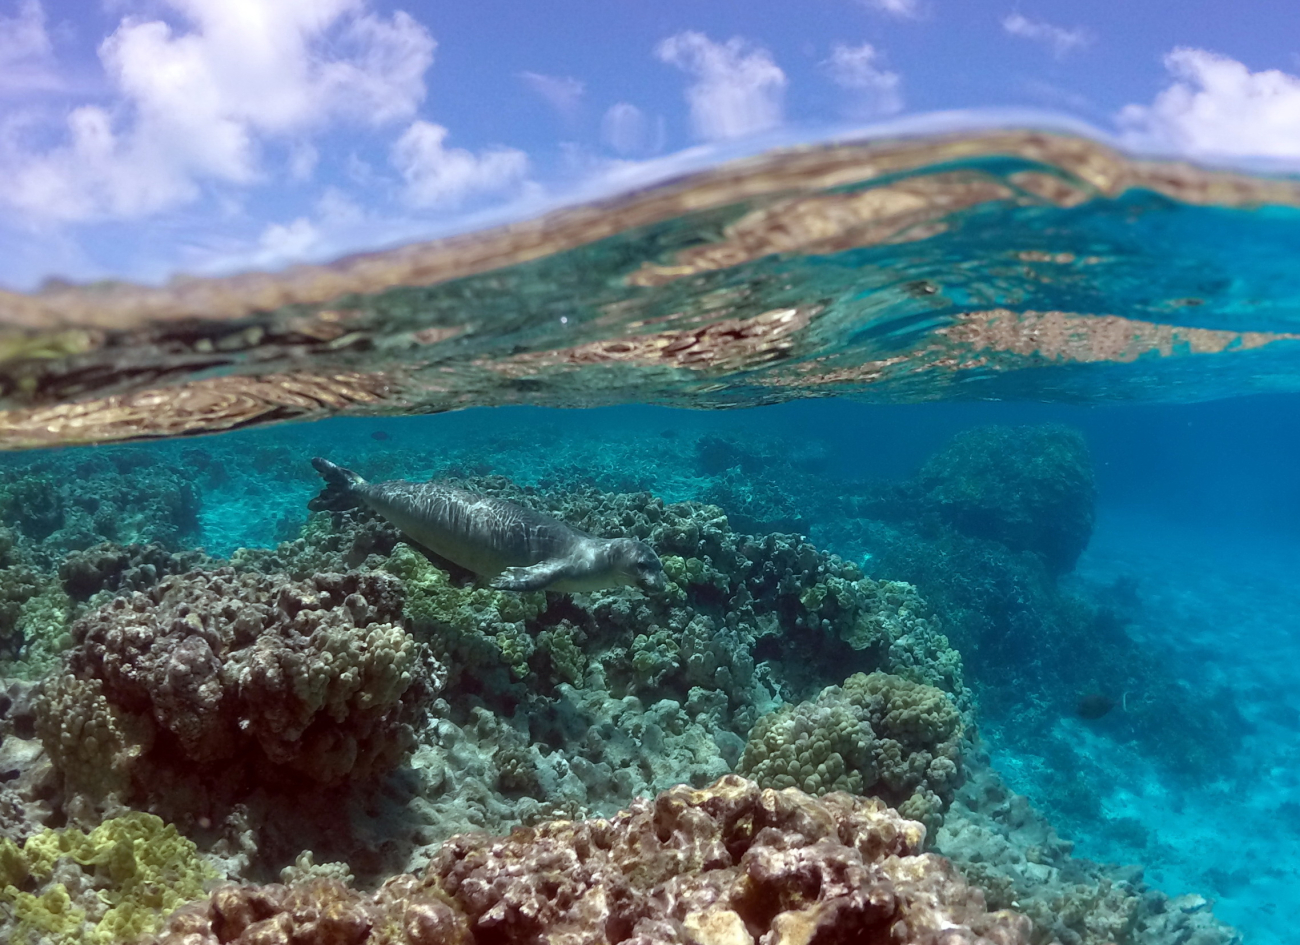 A magnificent photo of sea, swell, sky, and a monk seal swimming over acoral reef bottom